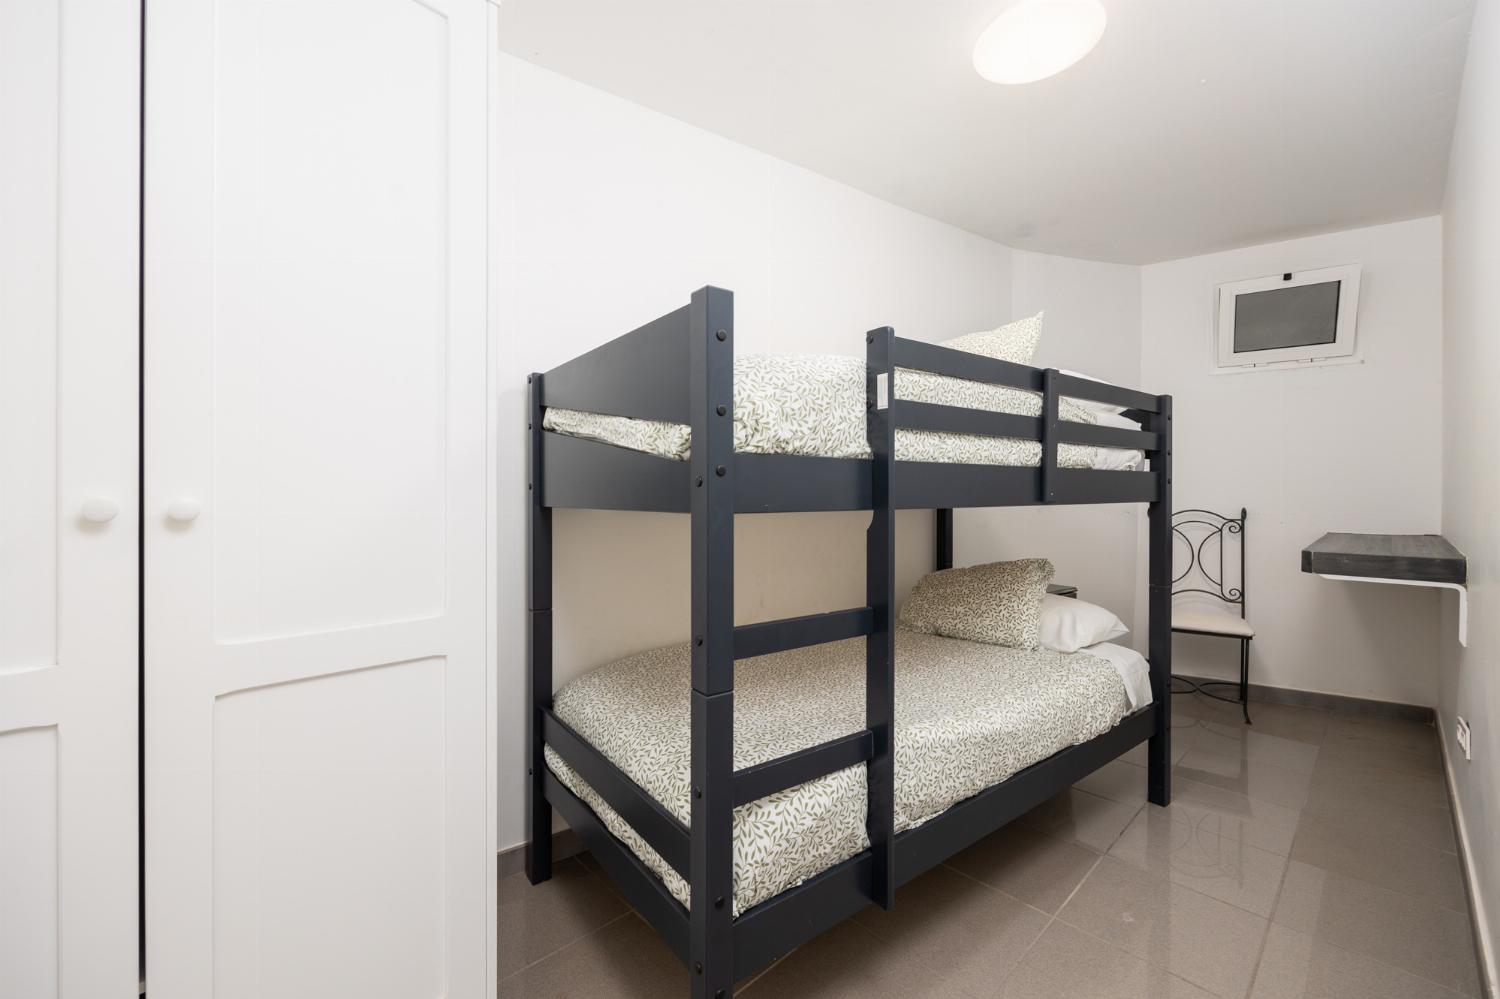 Unit 2: bedroom with bunk bed